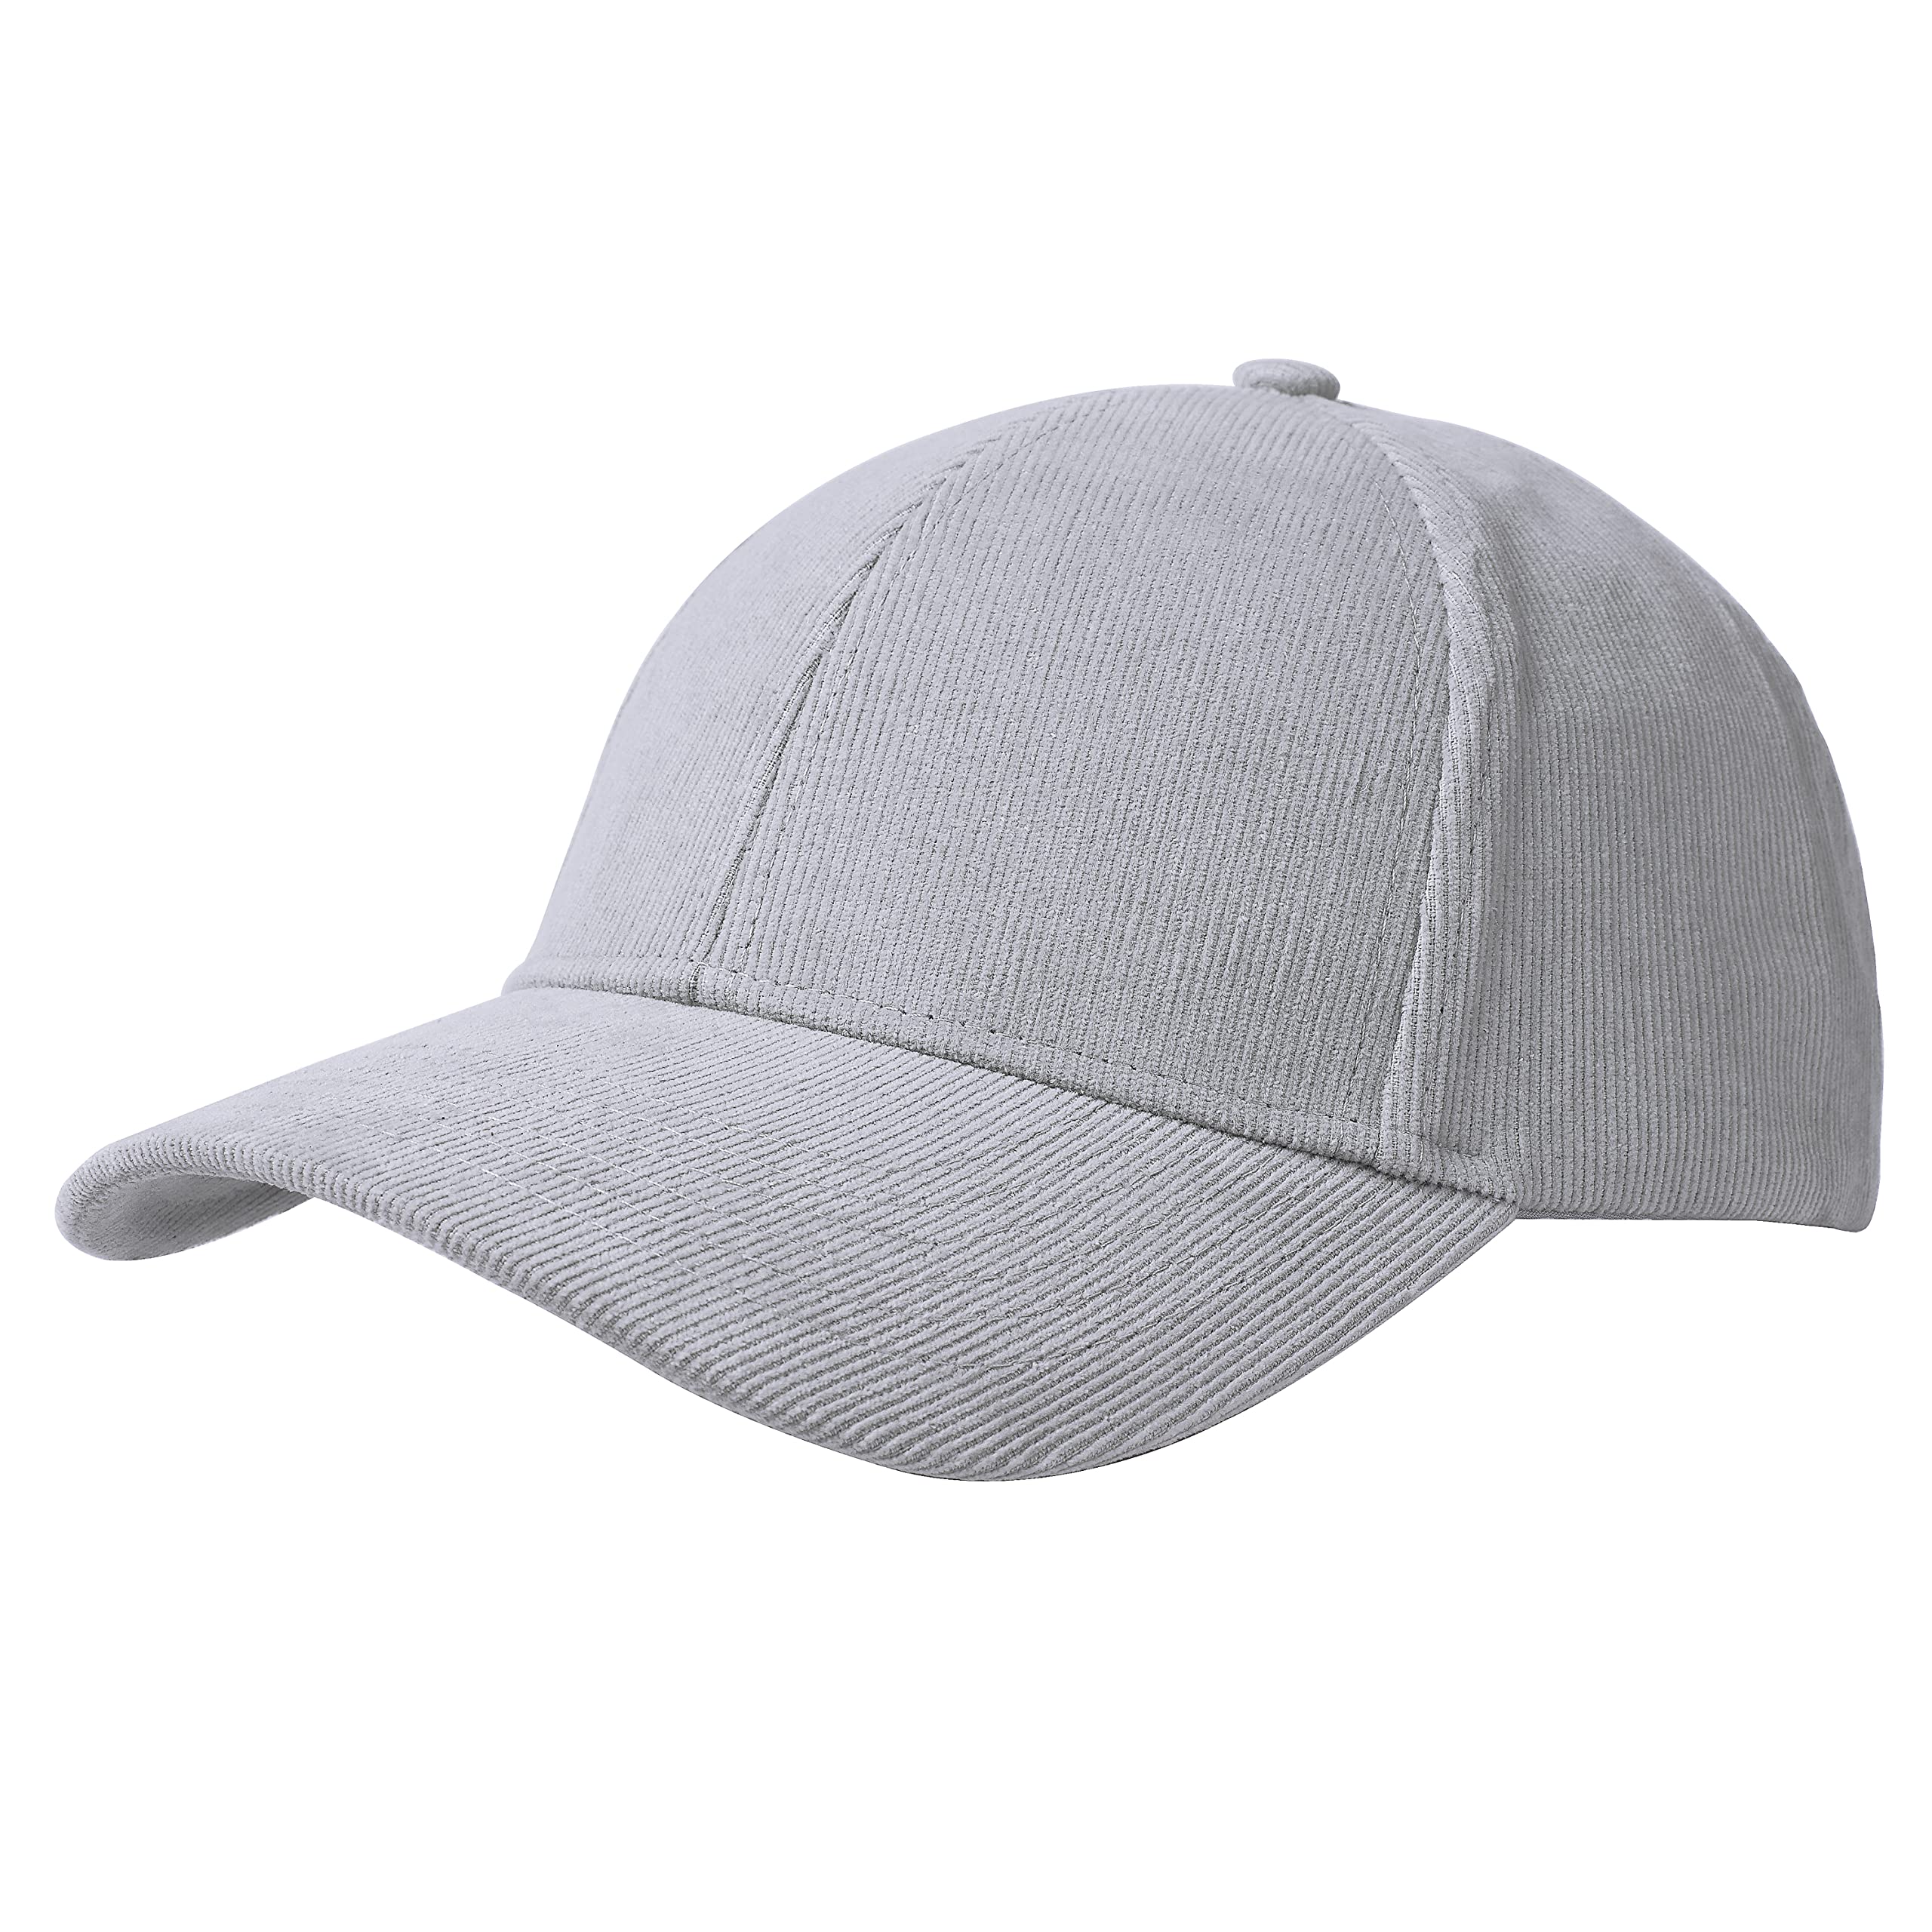 Faraday Silver Lined Emf Proof Hat e11, Faraday Hat